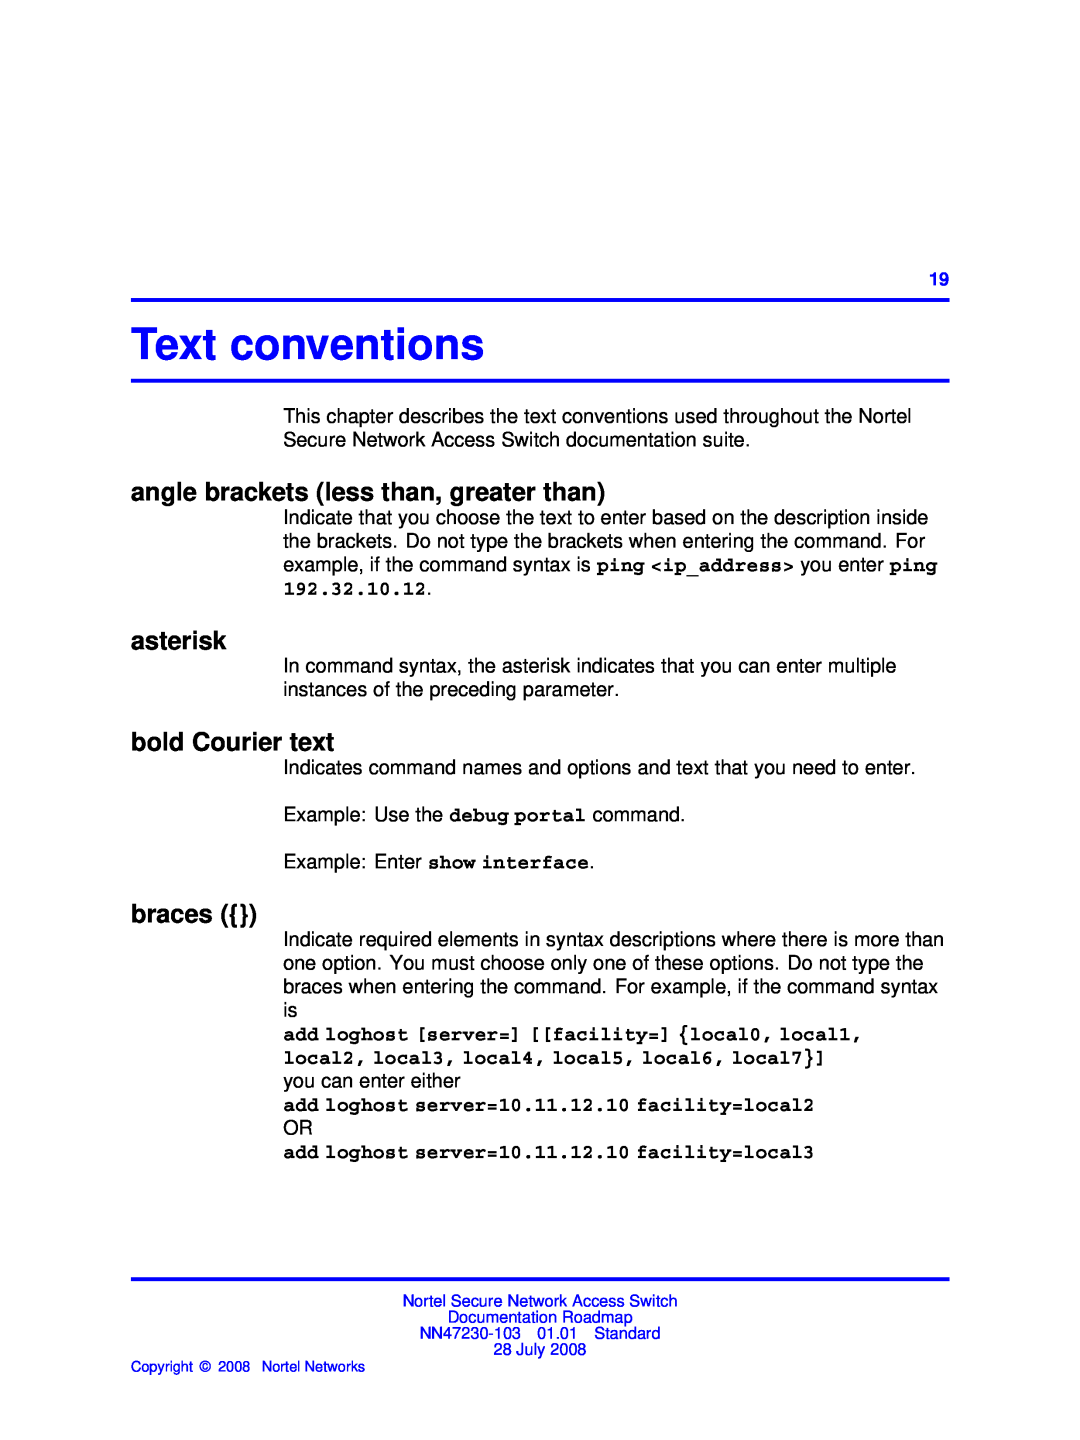 Nortel Networks NN47230-103 Text conventions, angle brackets less than, greater than, asterisk, bold Courier text, braces 